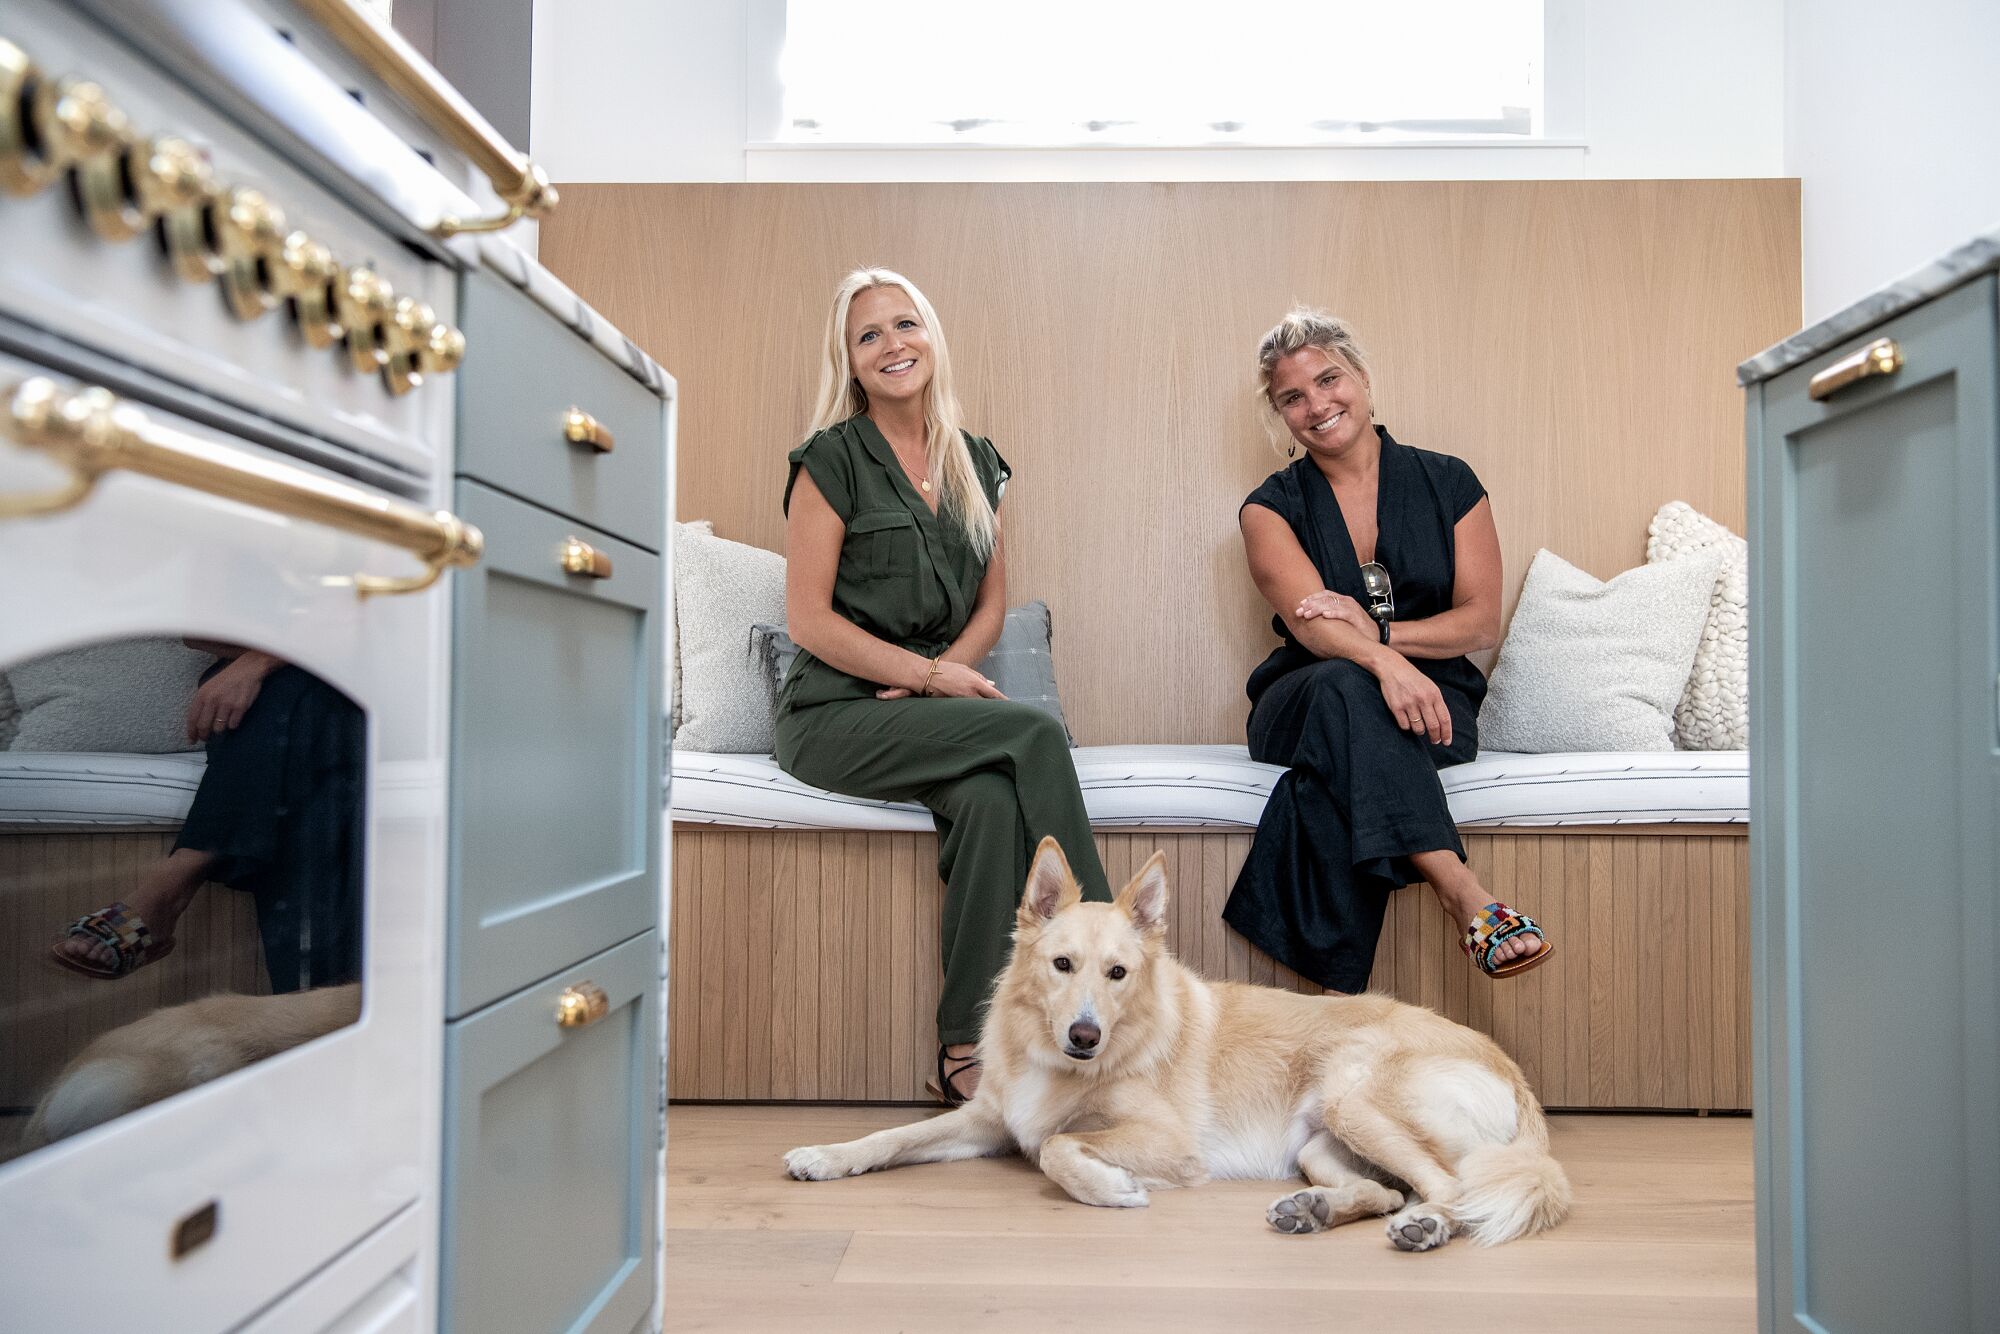 Designers Kristen Gundersen and Jenna Richter sit on a banquette with a dog 